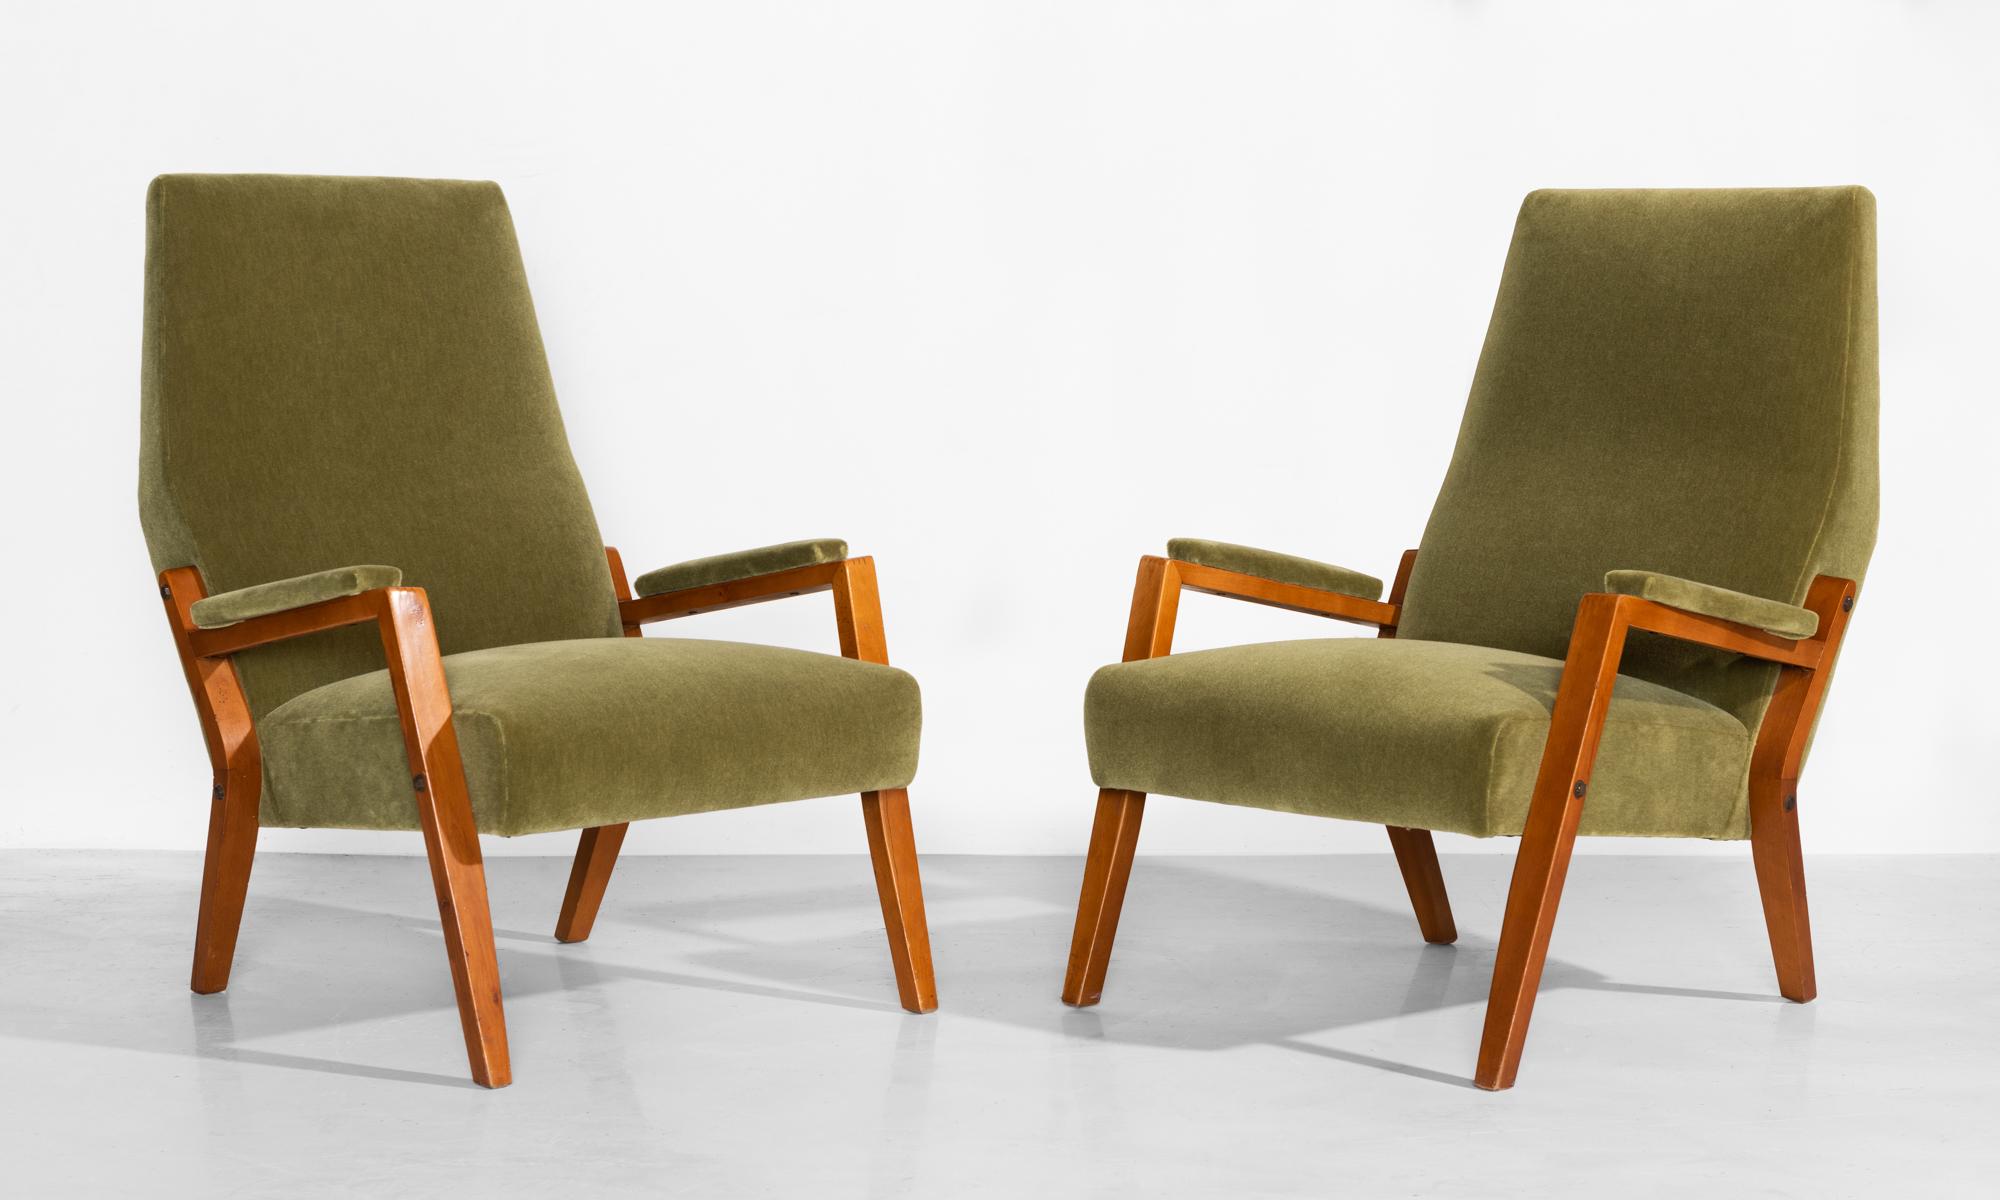 Pair of mohair lounge chairs, Italy, circa 1960

Handsome, low forms with beautiful joinery details, metal hardware and newly upholstered seats and armrests in Maharam mohair supreme.